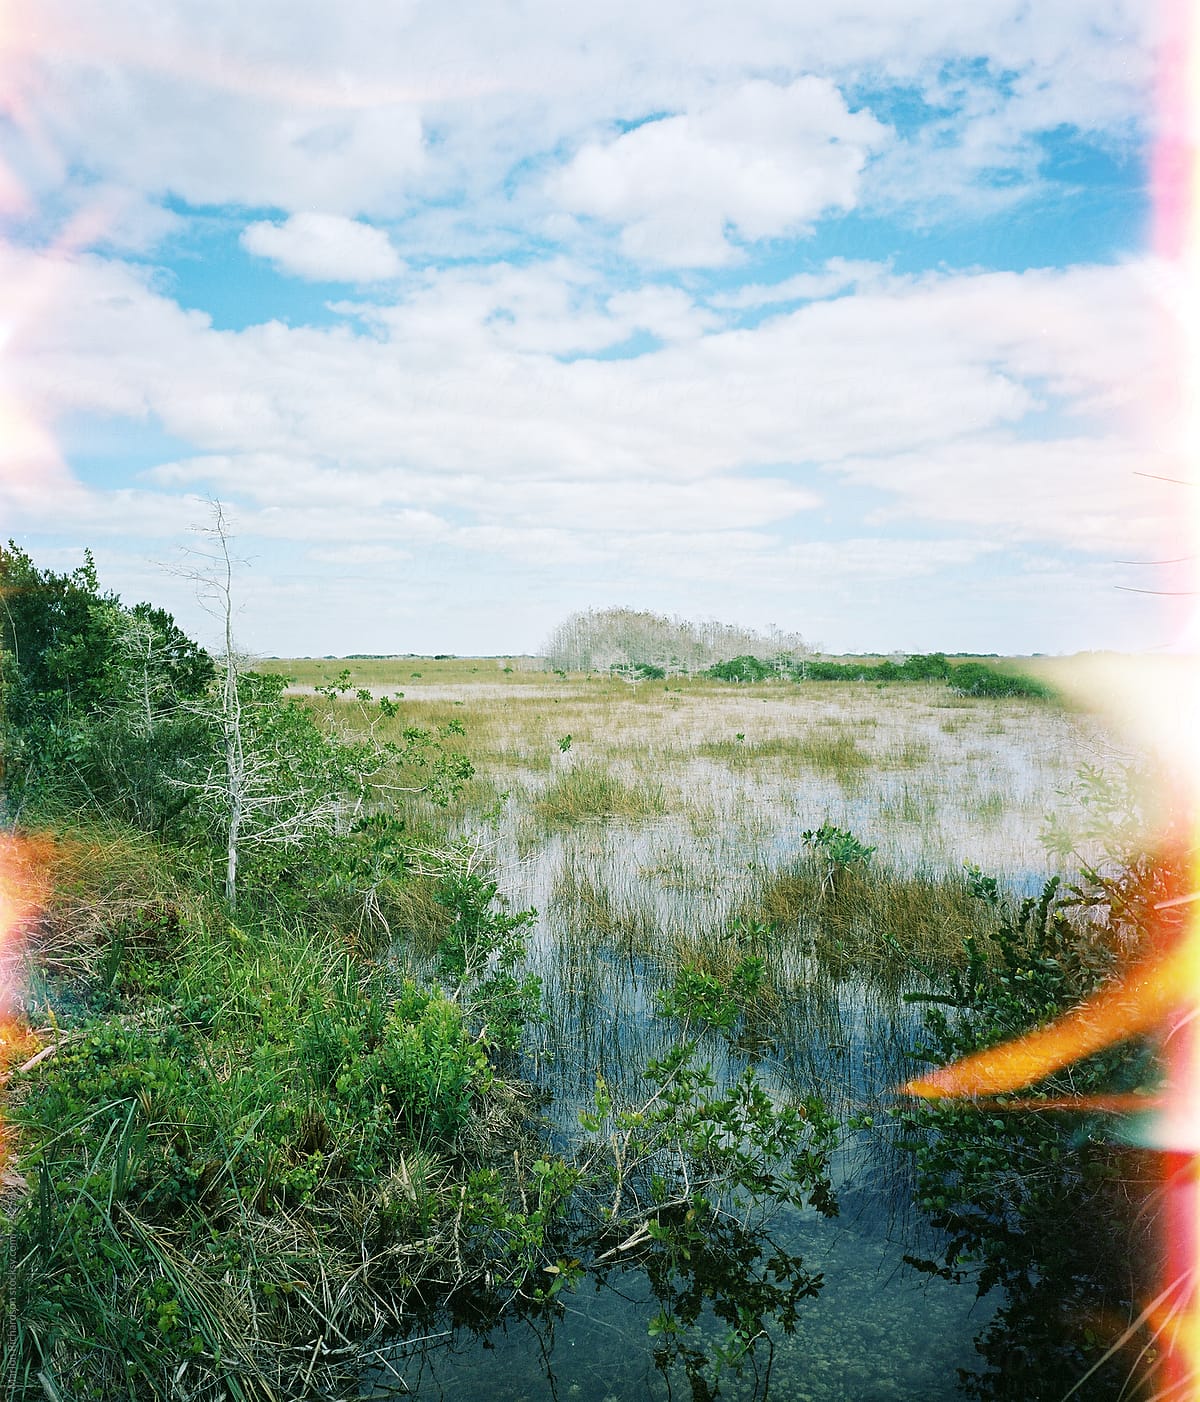 Climate change in the Florida Everglades